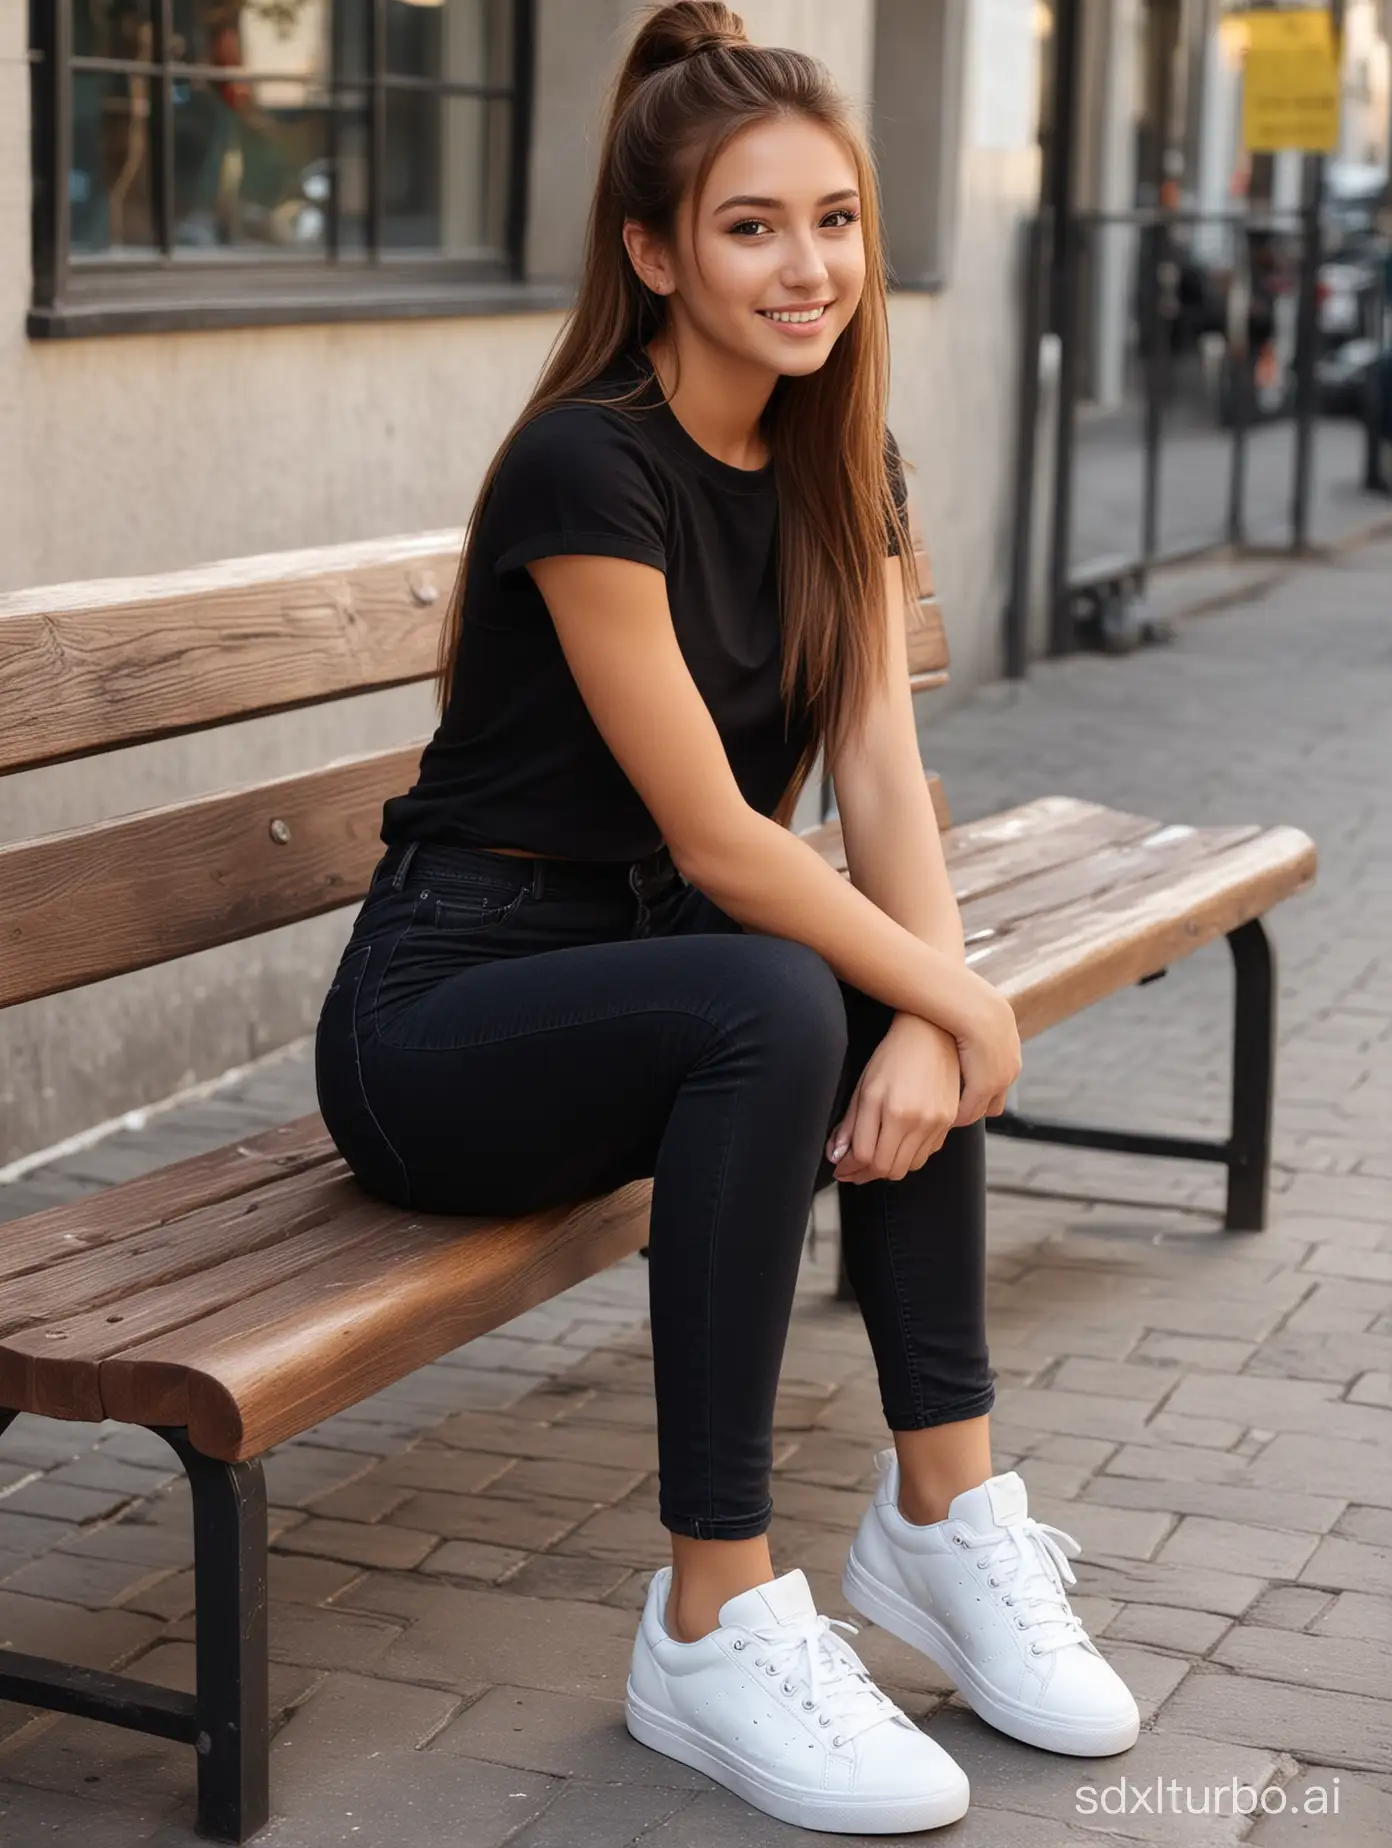 Confident-Eastern-European-Woman-with-Glowing-Skin-Sitting-on-Bench